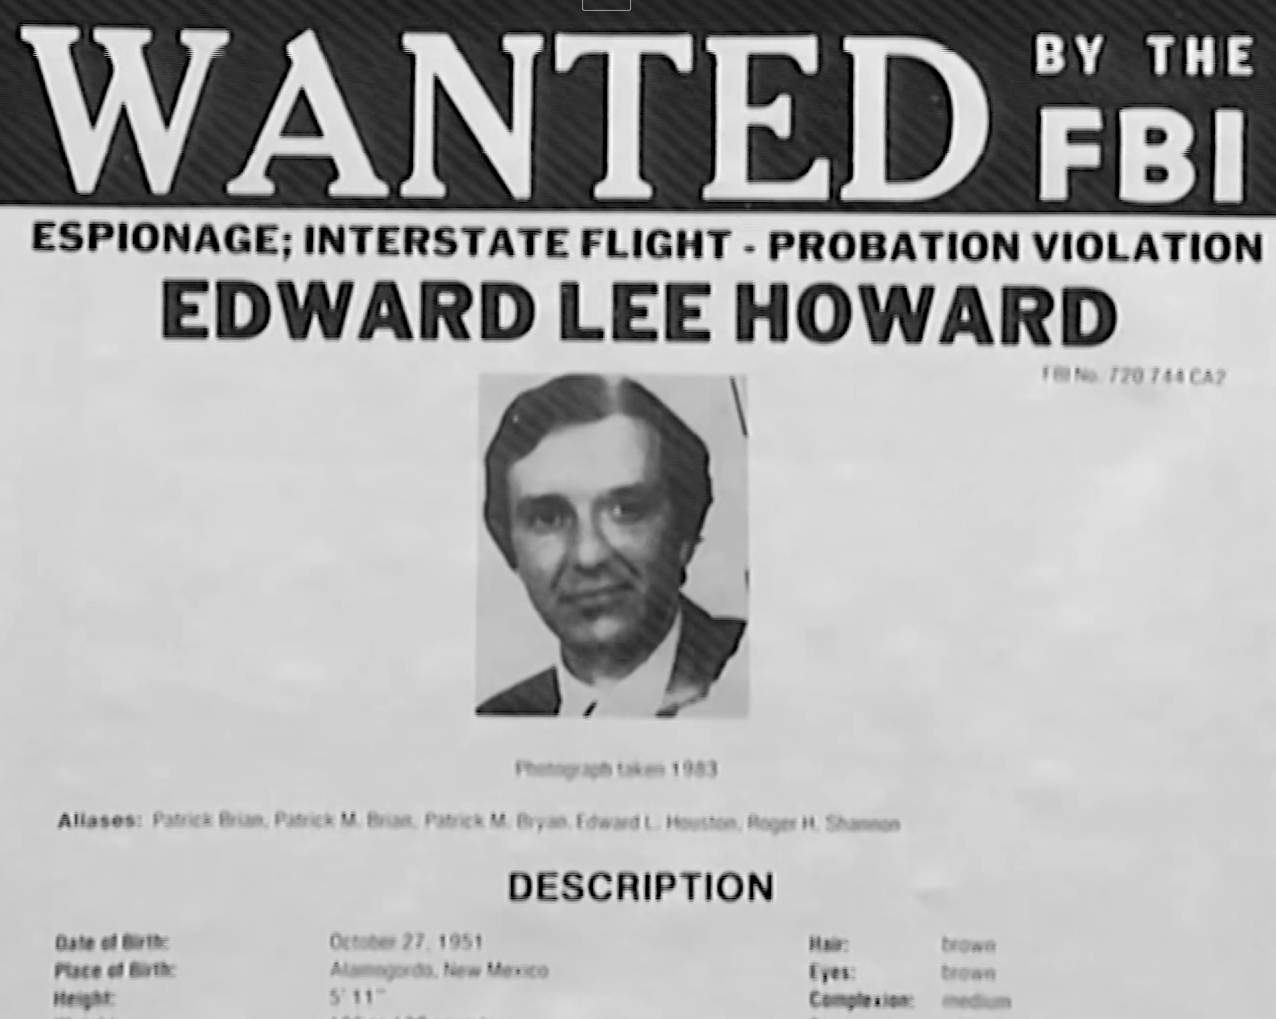 Wanted poster for CIA spy Edward Lee Howard